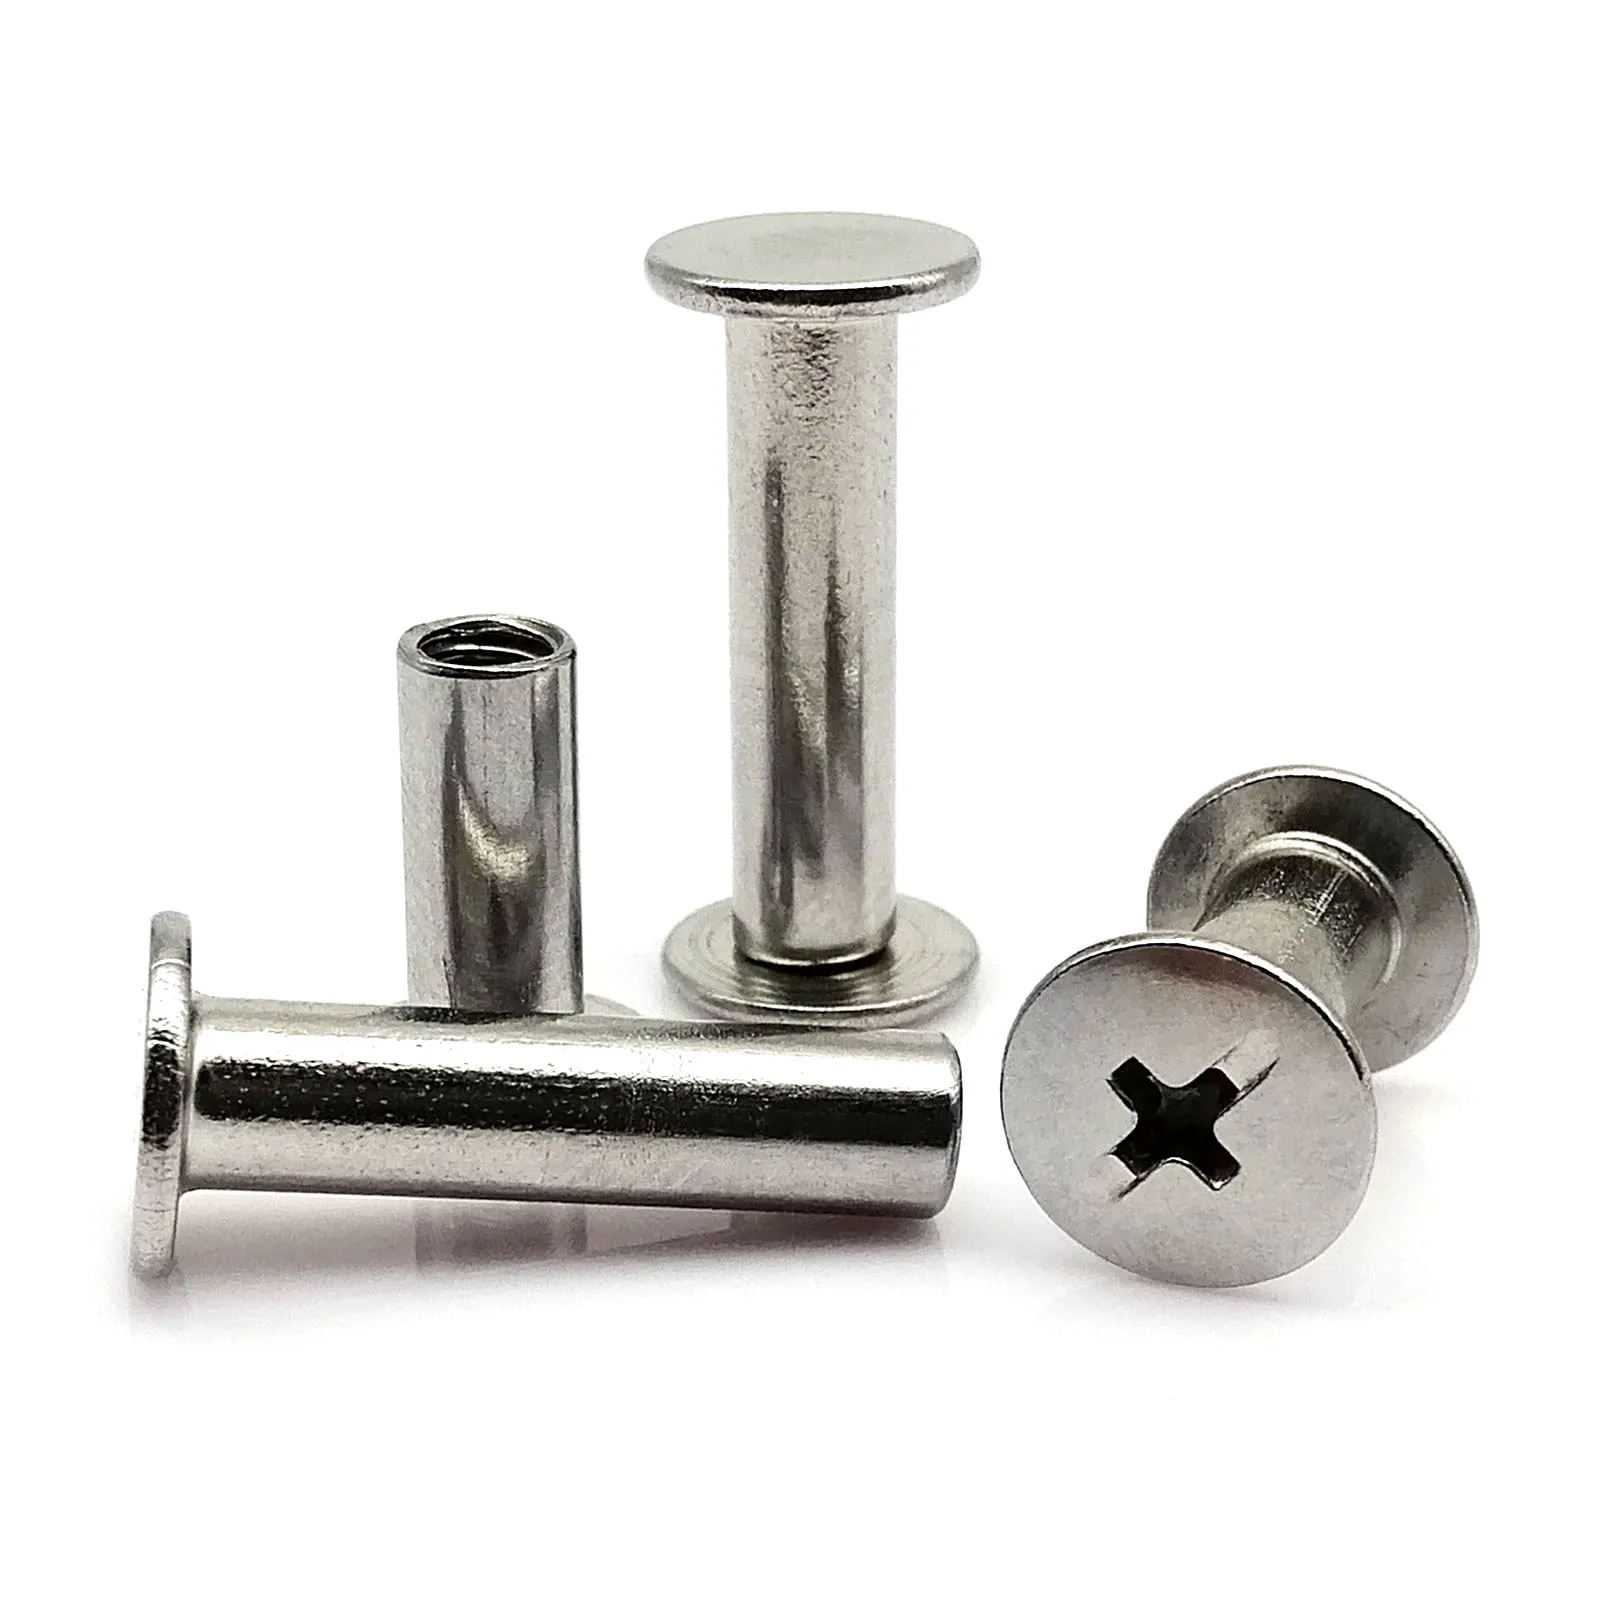 

M5x5 to 80mm 304 Stainless Steel Leather Bag Belt Photo Scrapbook Album Book Post Binding Screw Chicago Screw Nail Rivet Bolt